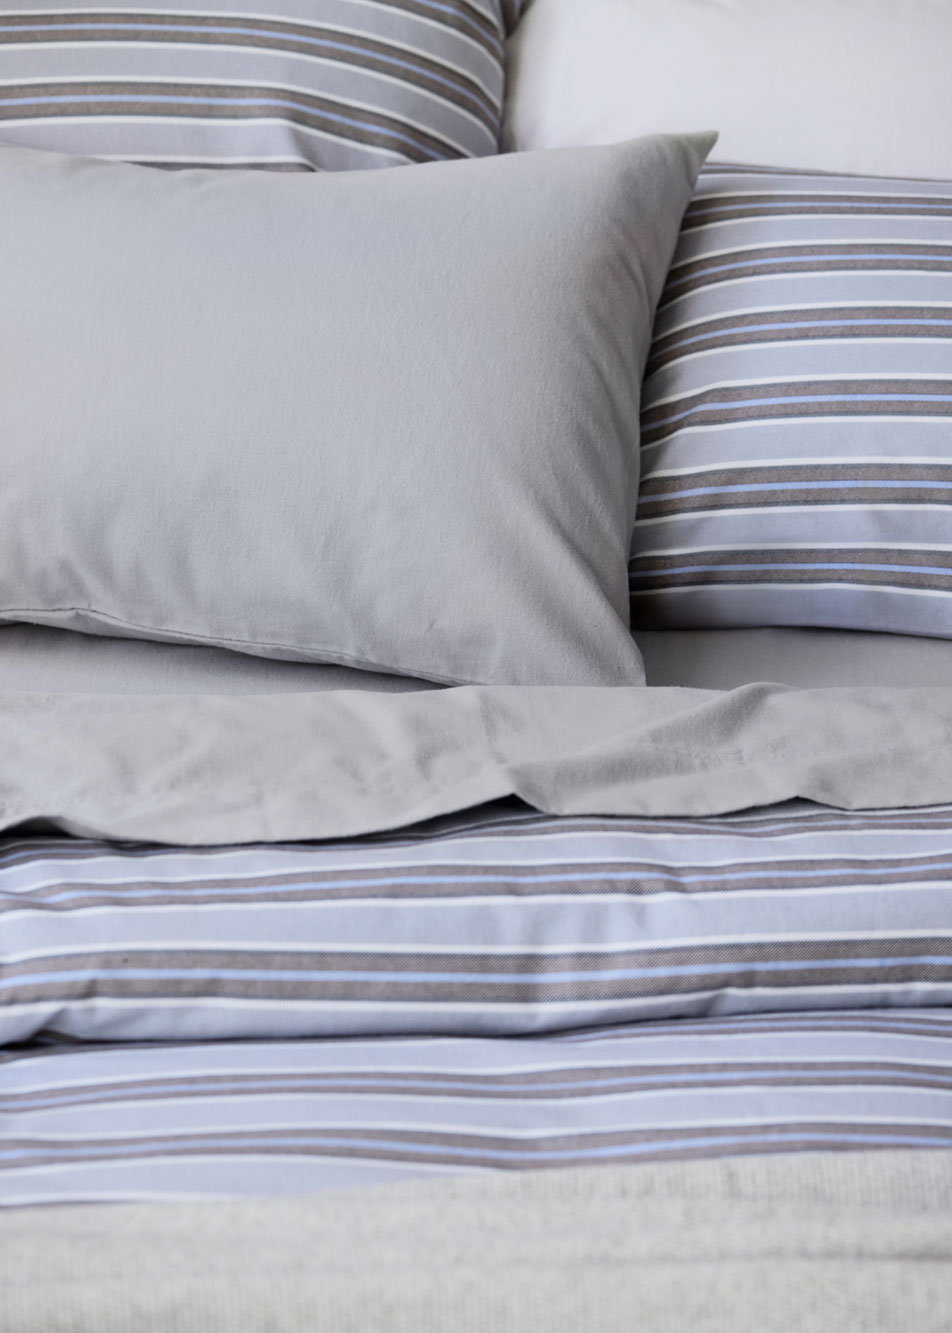 A close-up of a bed dressed in grey and blue stripe flannelette